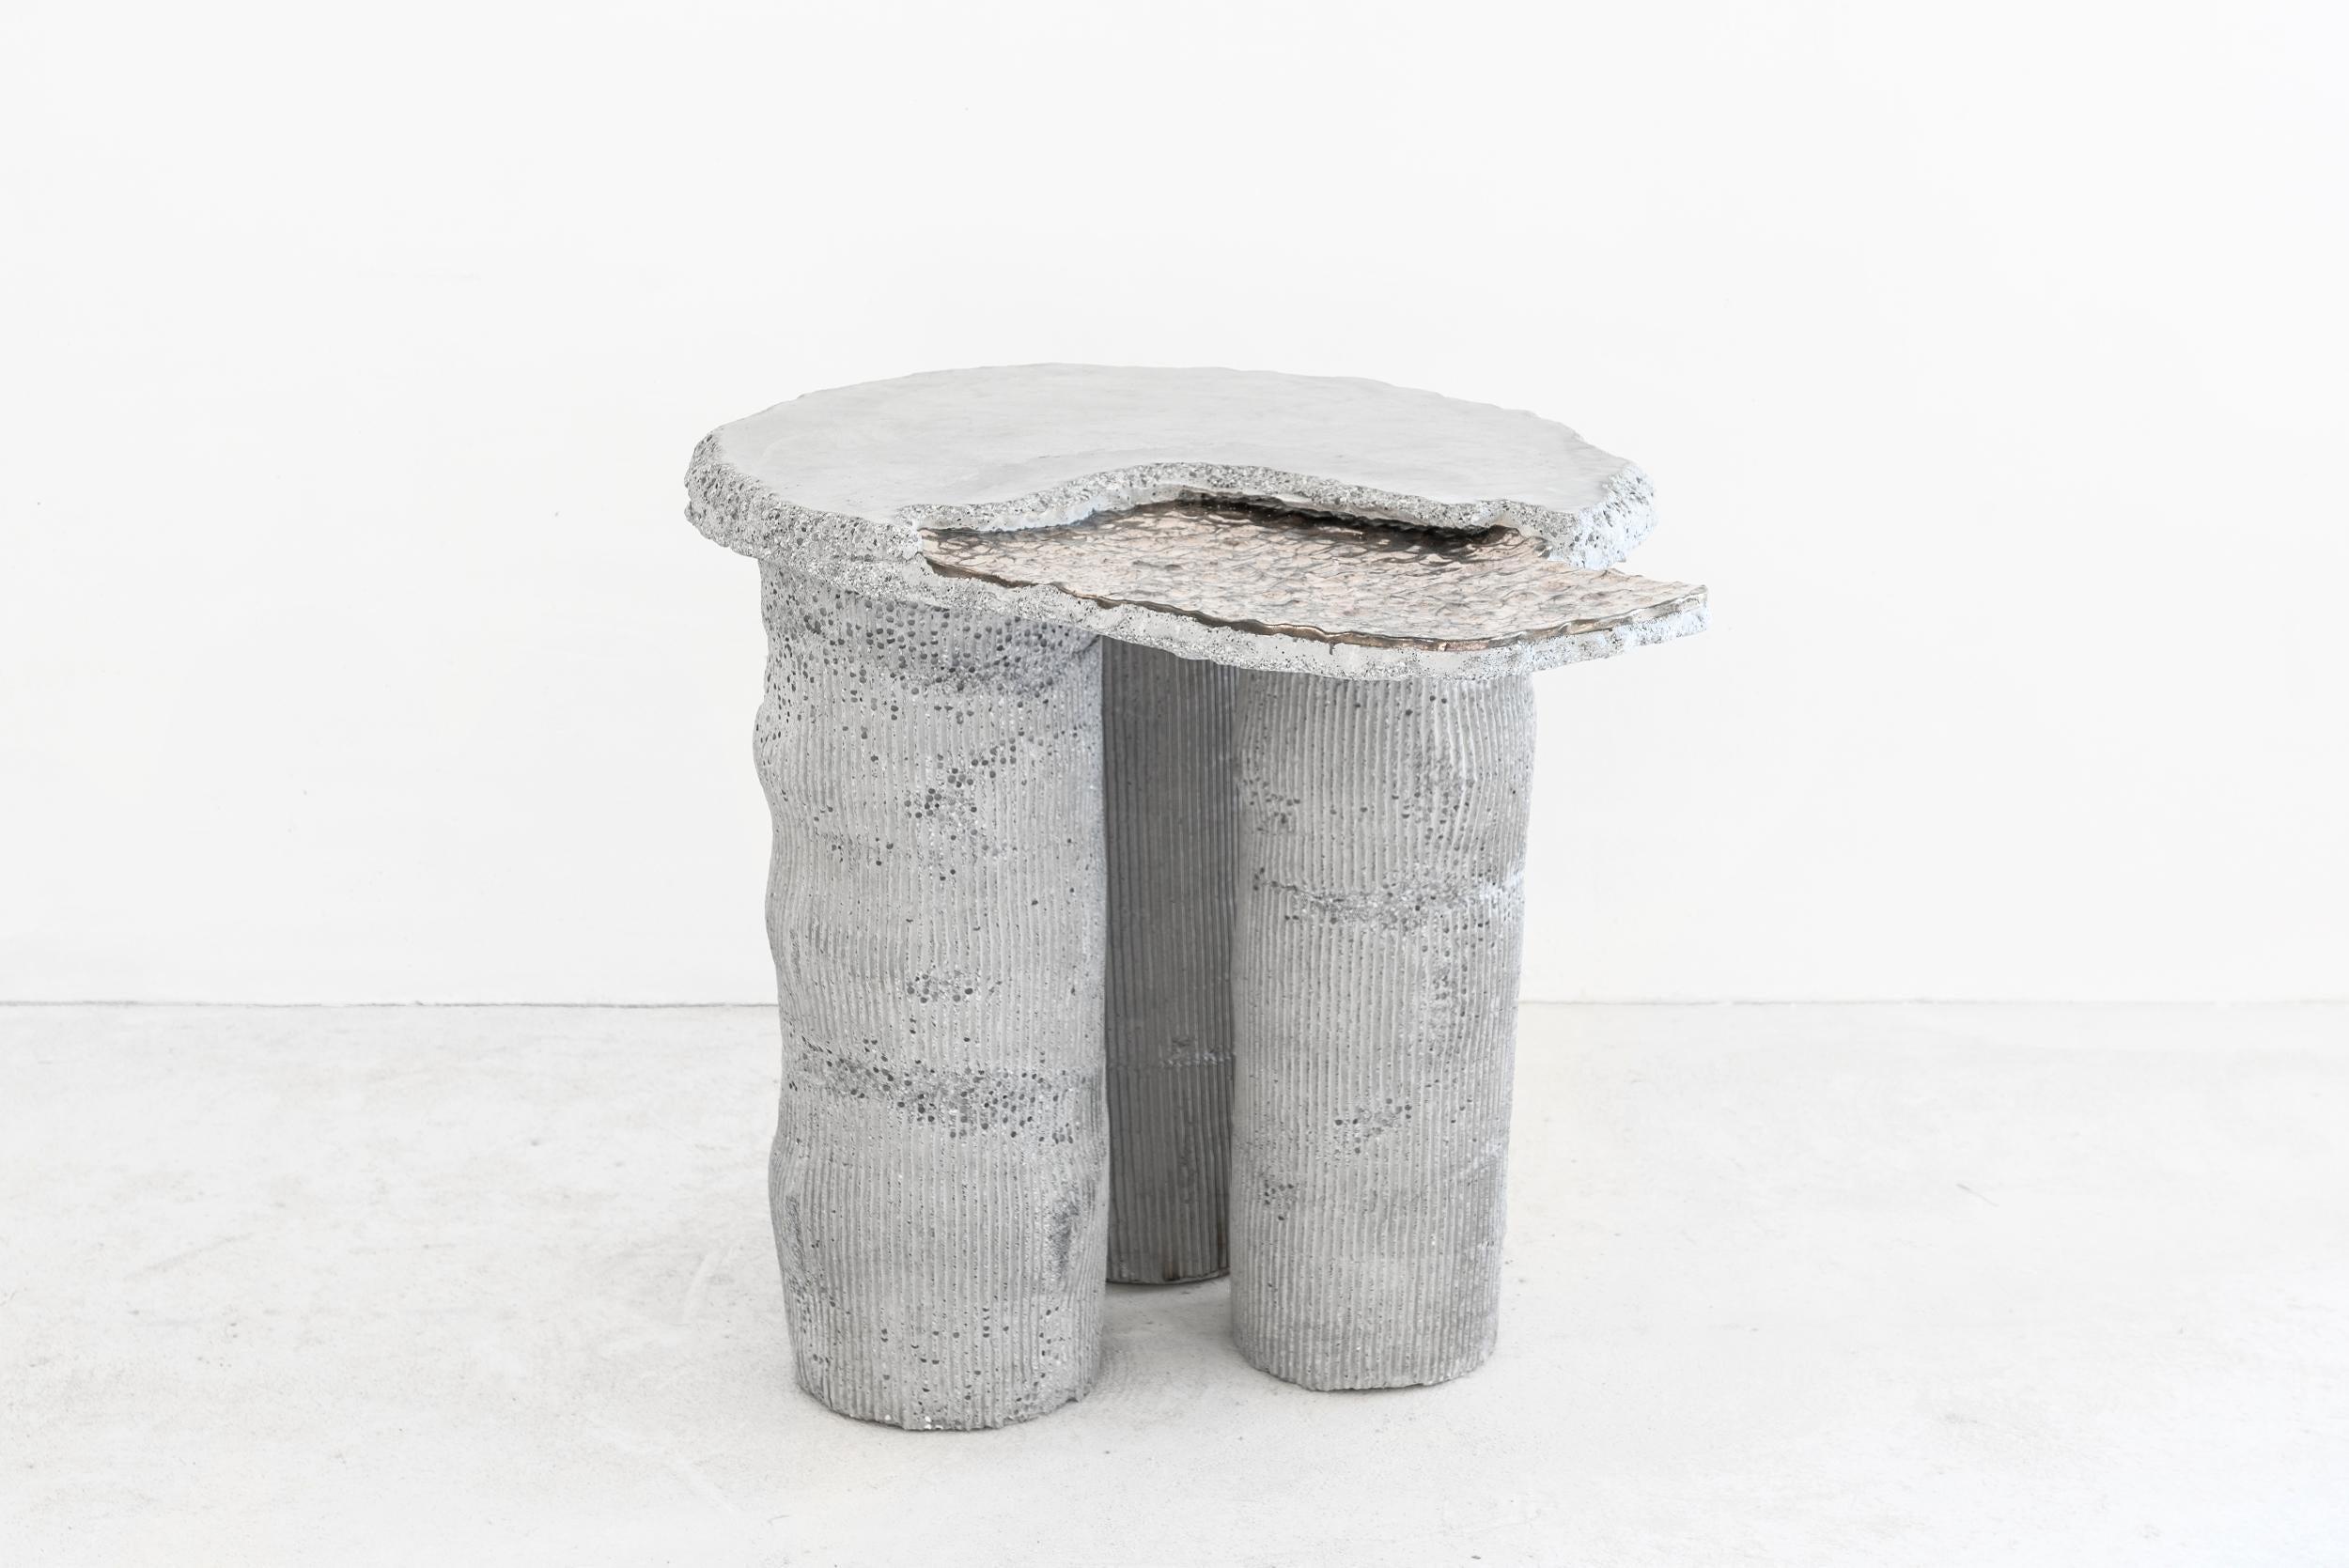 Rodrigo Pinto 
High side table
From the series “Tierras Hipnóticas” (Hypnopompic lands)
Manufactured by Rodrigo Pinto
Santiago de Chile, 2020
Produced in exclusive for Side Gallery
Concrete consisting of marble grains, stone carbonates, copper